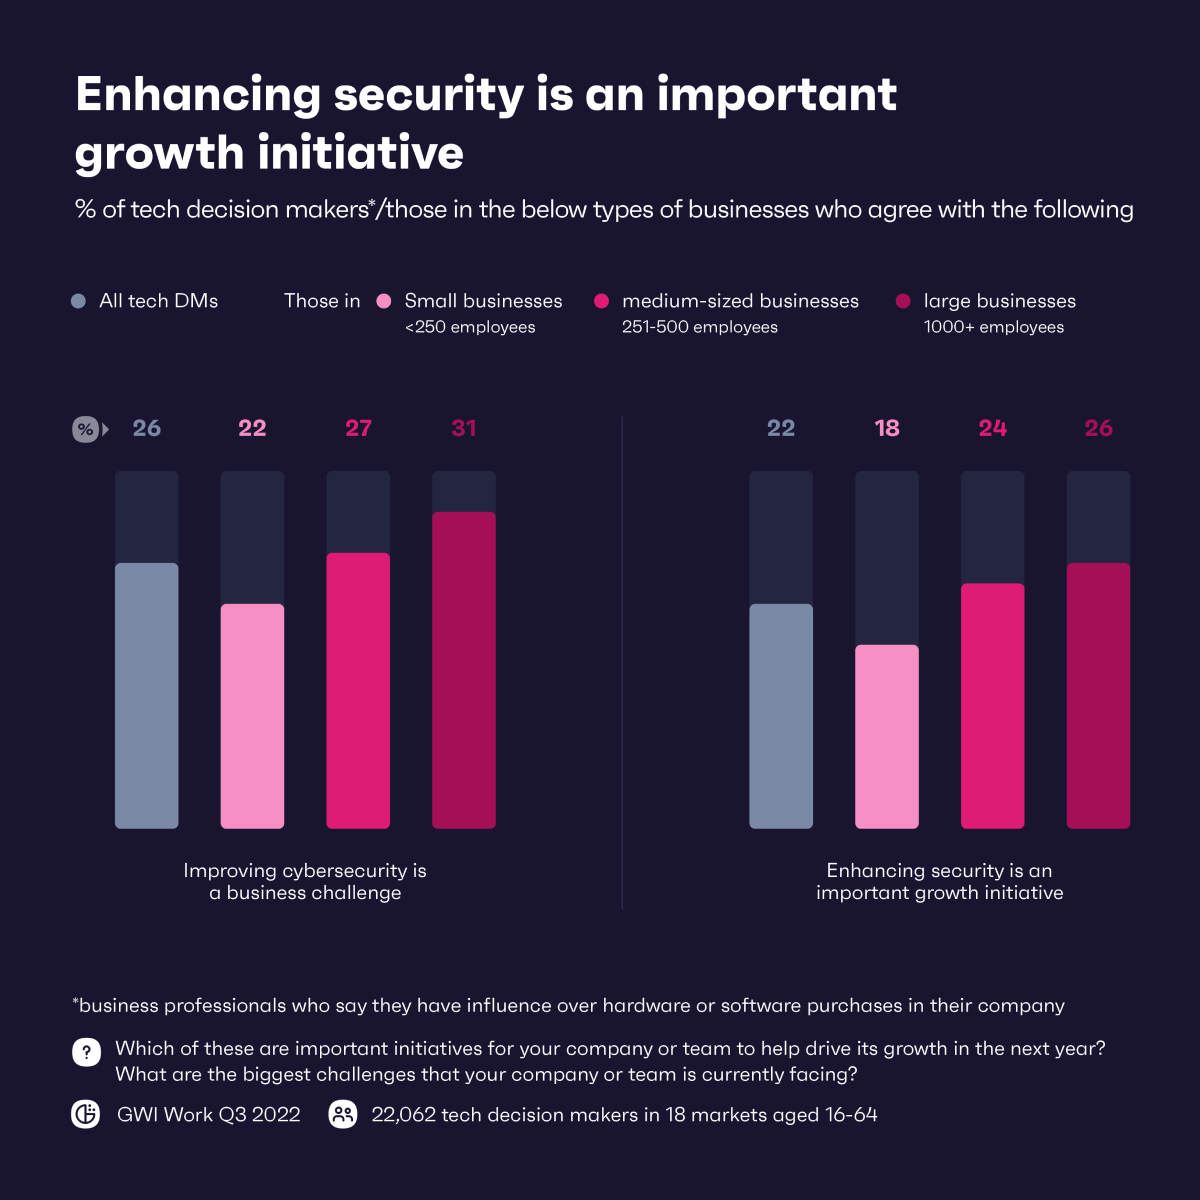 Chart showing types of businesses who think enhancing security is an important growth initiative